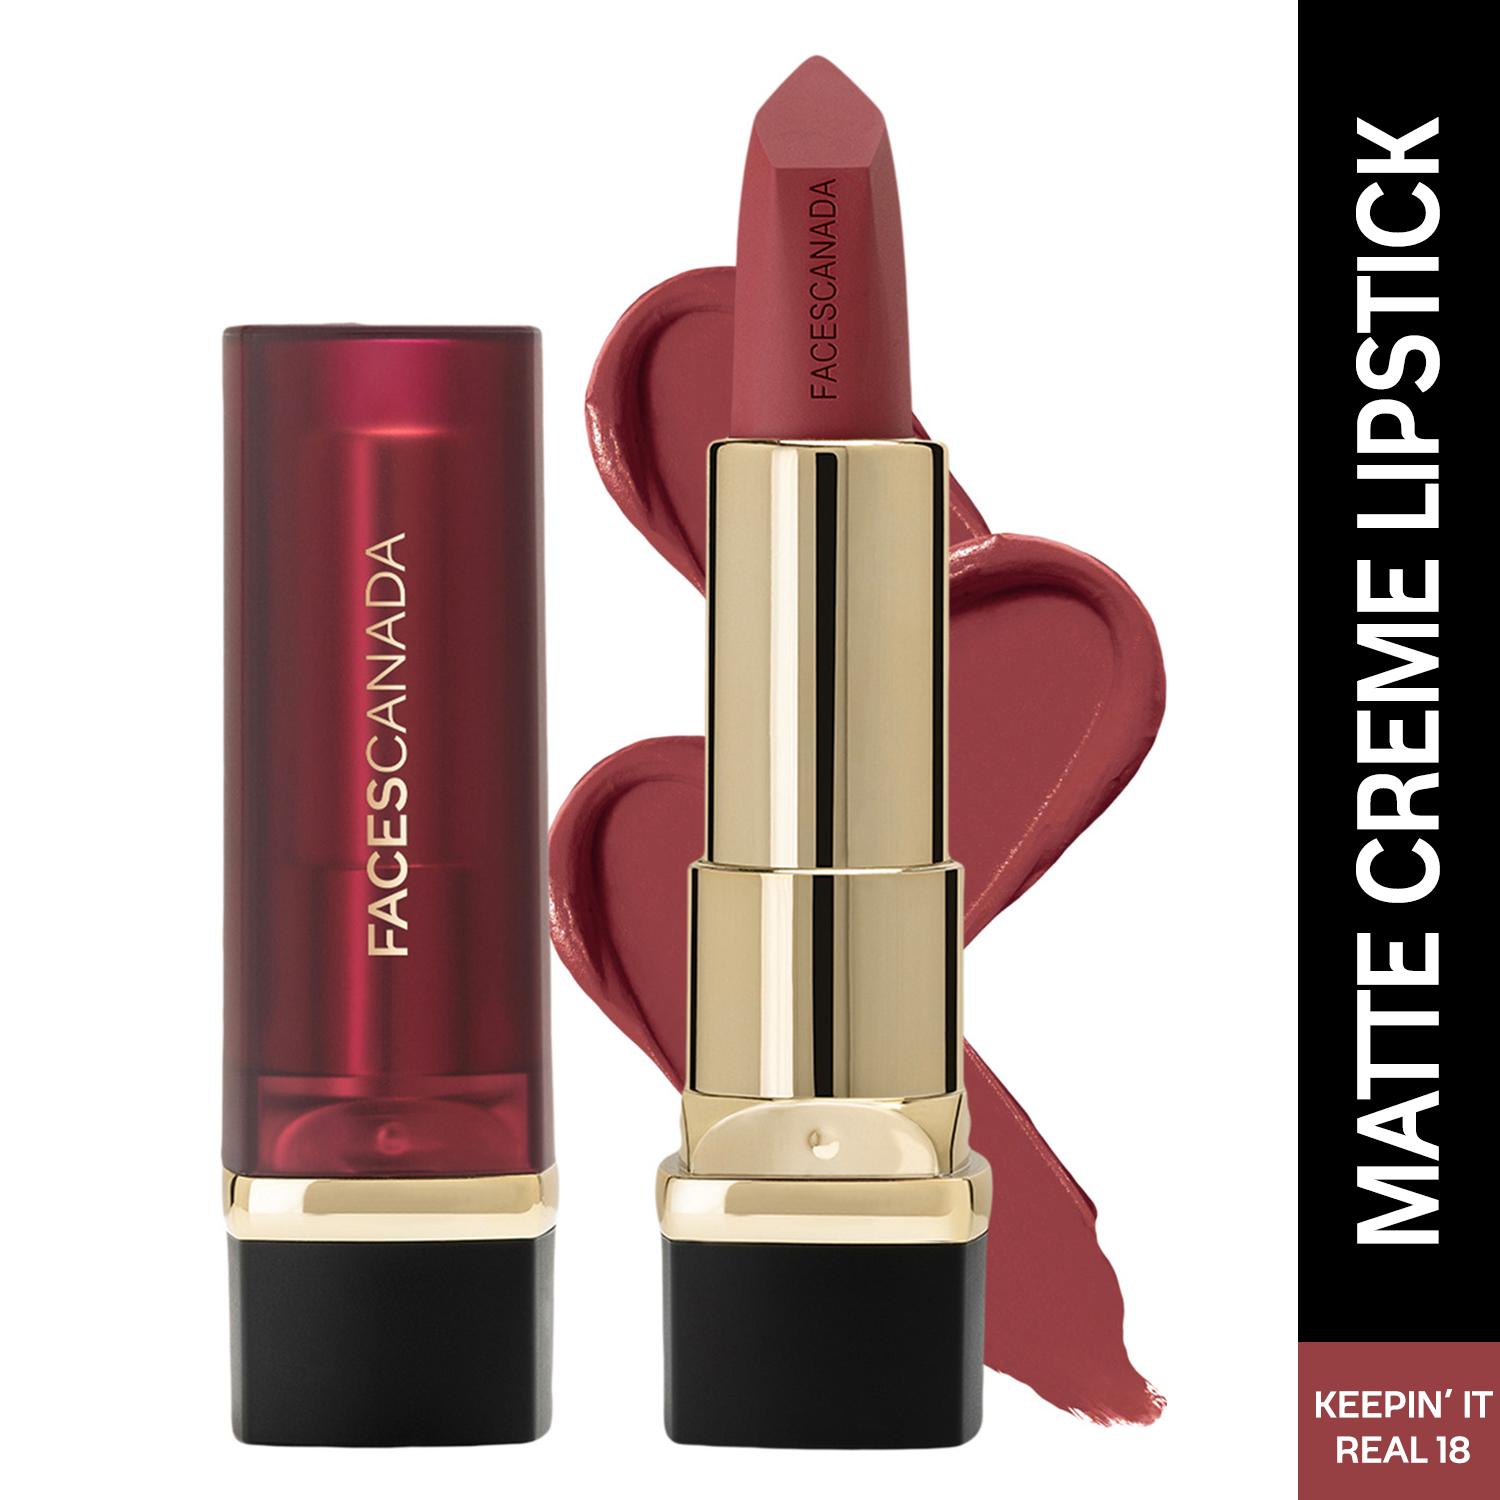 Faces Canada | Faces Canada Comfy Matte Crème Lipstick, 8HR Long Stay, Intense Color - Keepin’ It Real 18 (4.2 g)